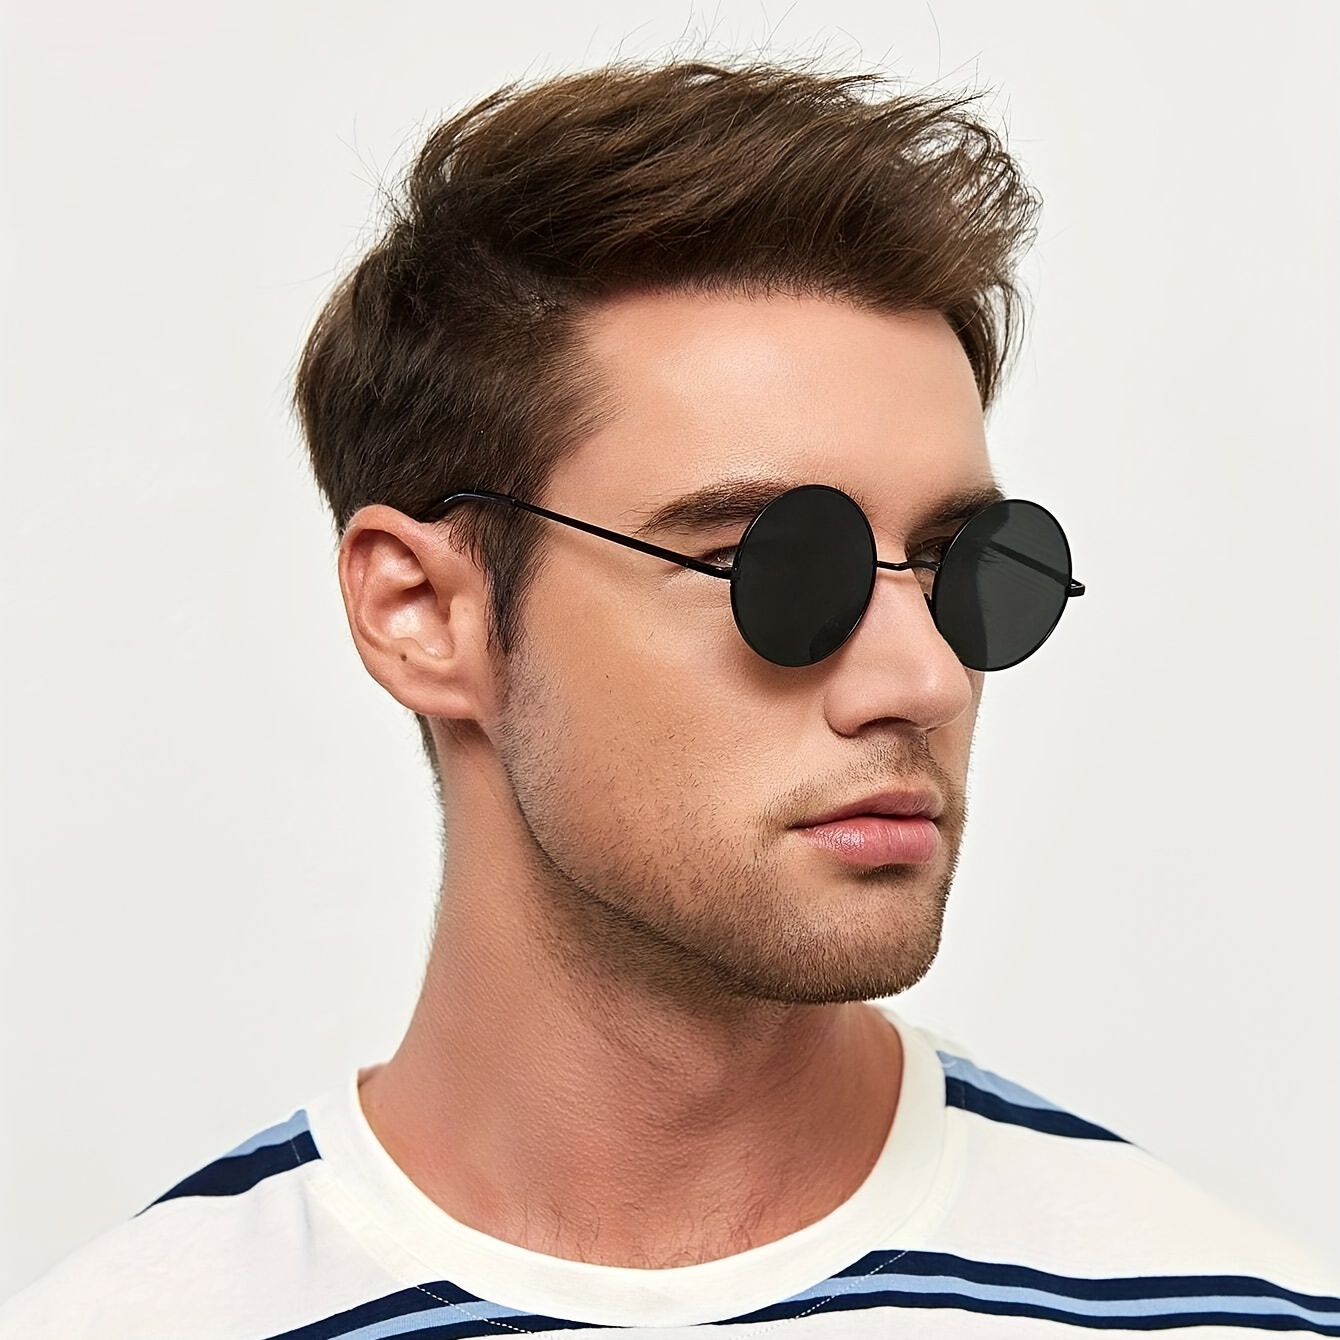 Men's Classic Casual Round Frame Fashion Glasses, ideal choice for gifts